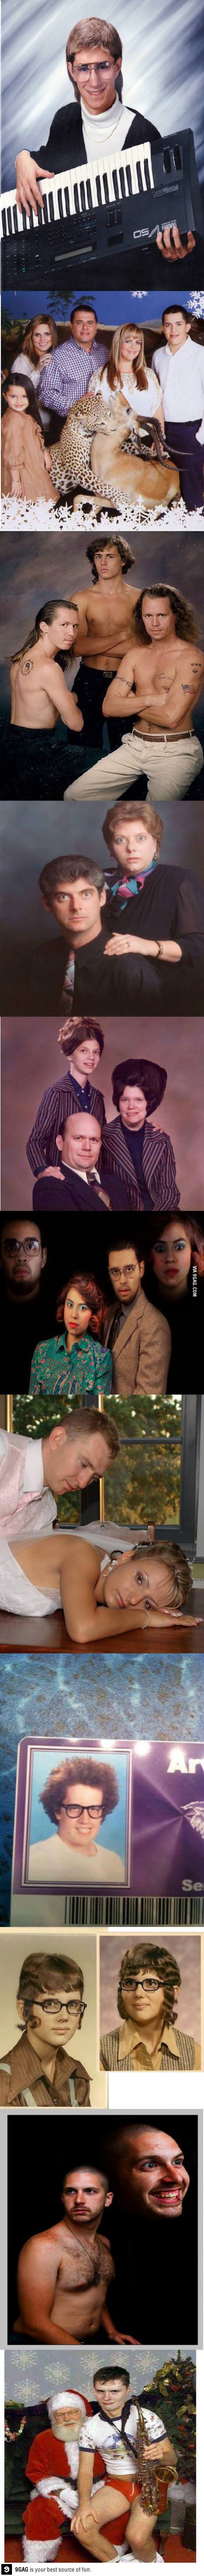 awkward photo, portrait, family, wtf, weird, compilation, long